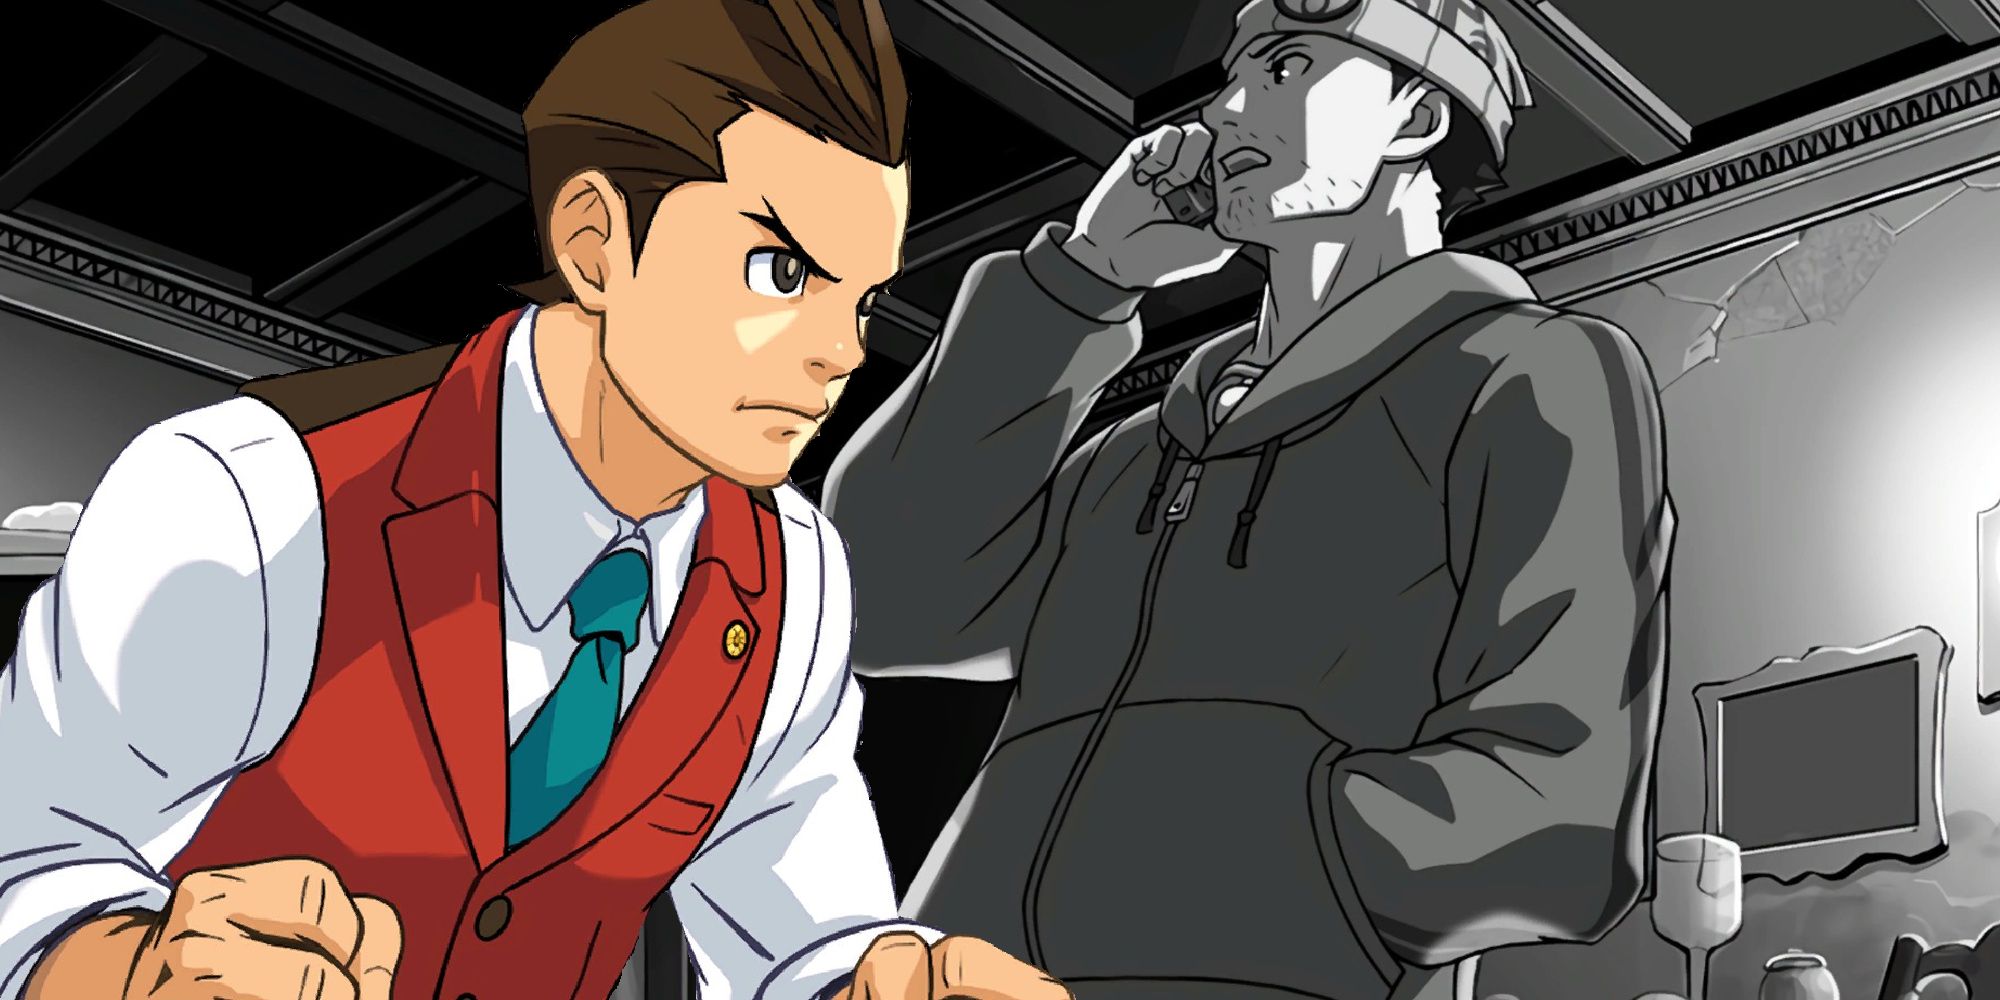 Apollo Justice overlaid on a black and white picture of Phoenix Wright